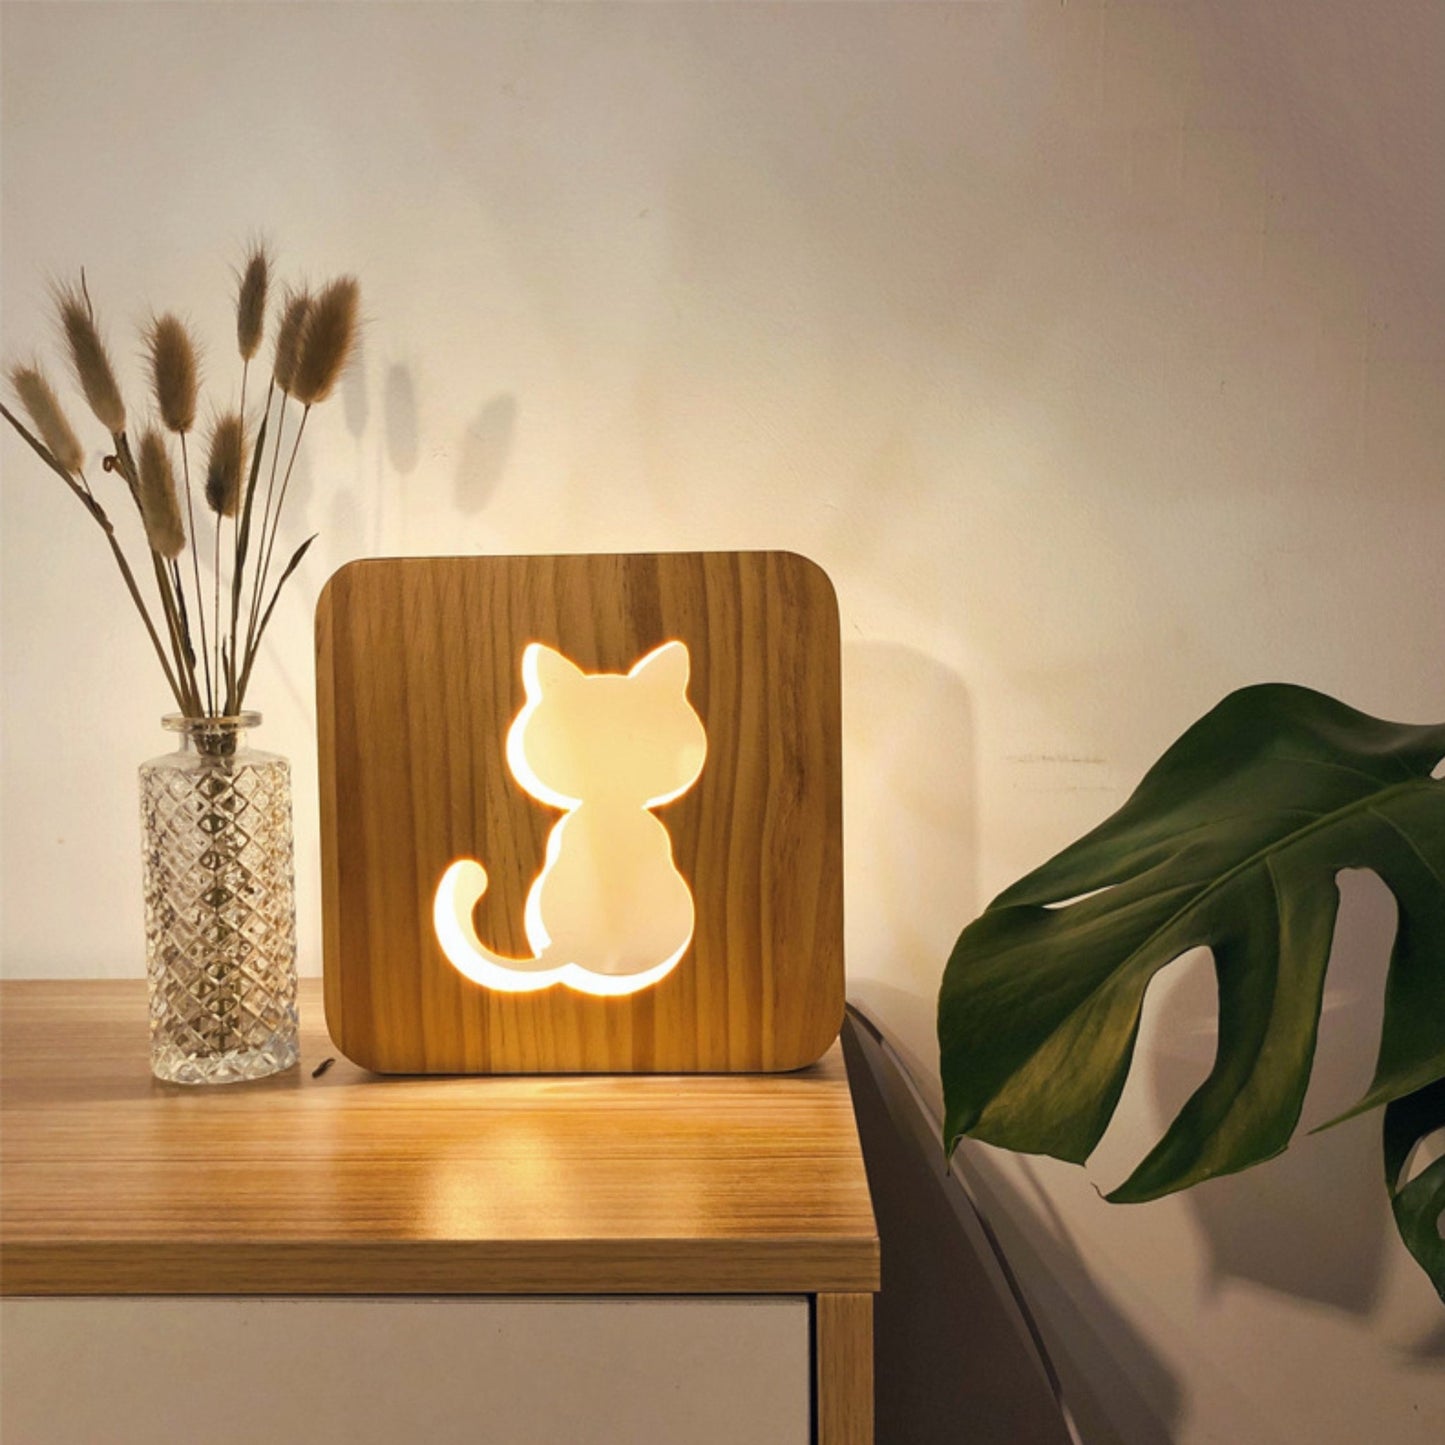 Minimalist Wooden Nursery Night Light - Space Mesmerise - Space Gifts | Lamps | Statues | Home Decor